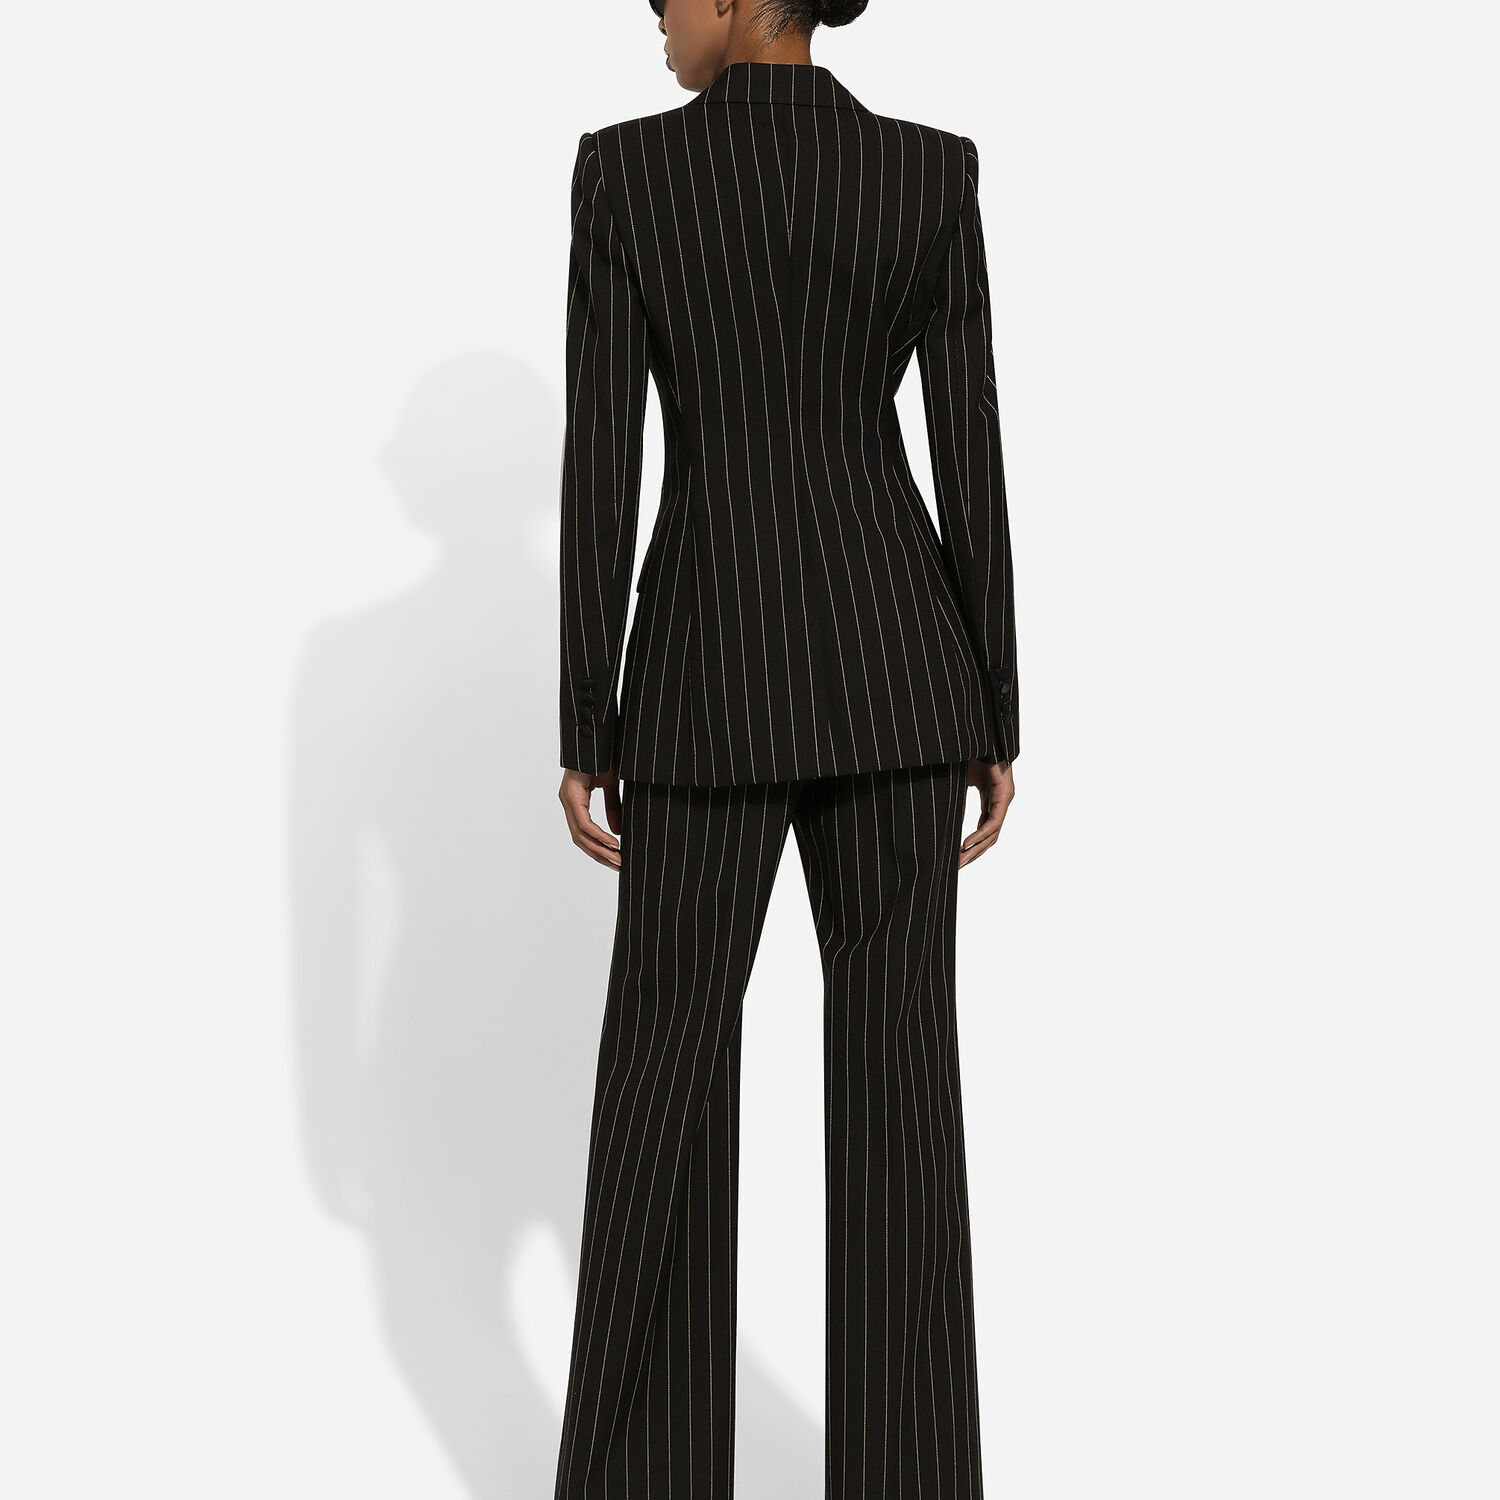 Dolce and Gabbana 2000s Runway Pinstripe Capri Pants with Suspender Clips ·  INTO